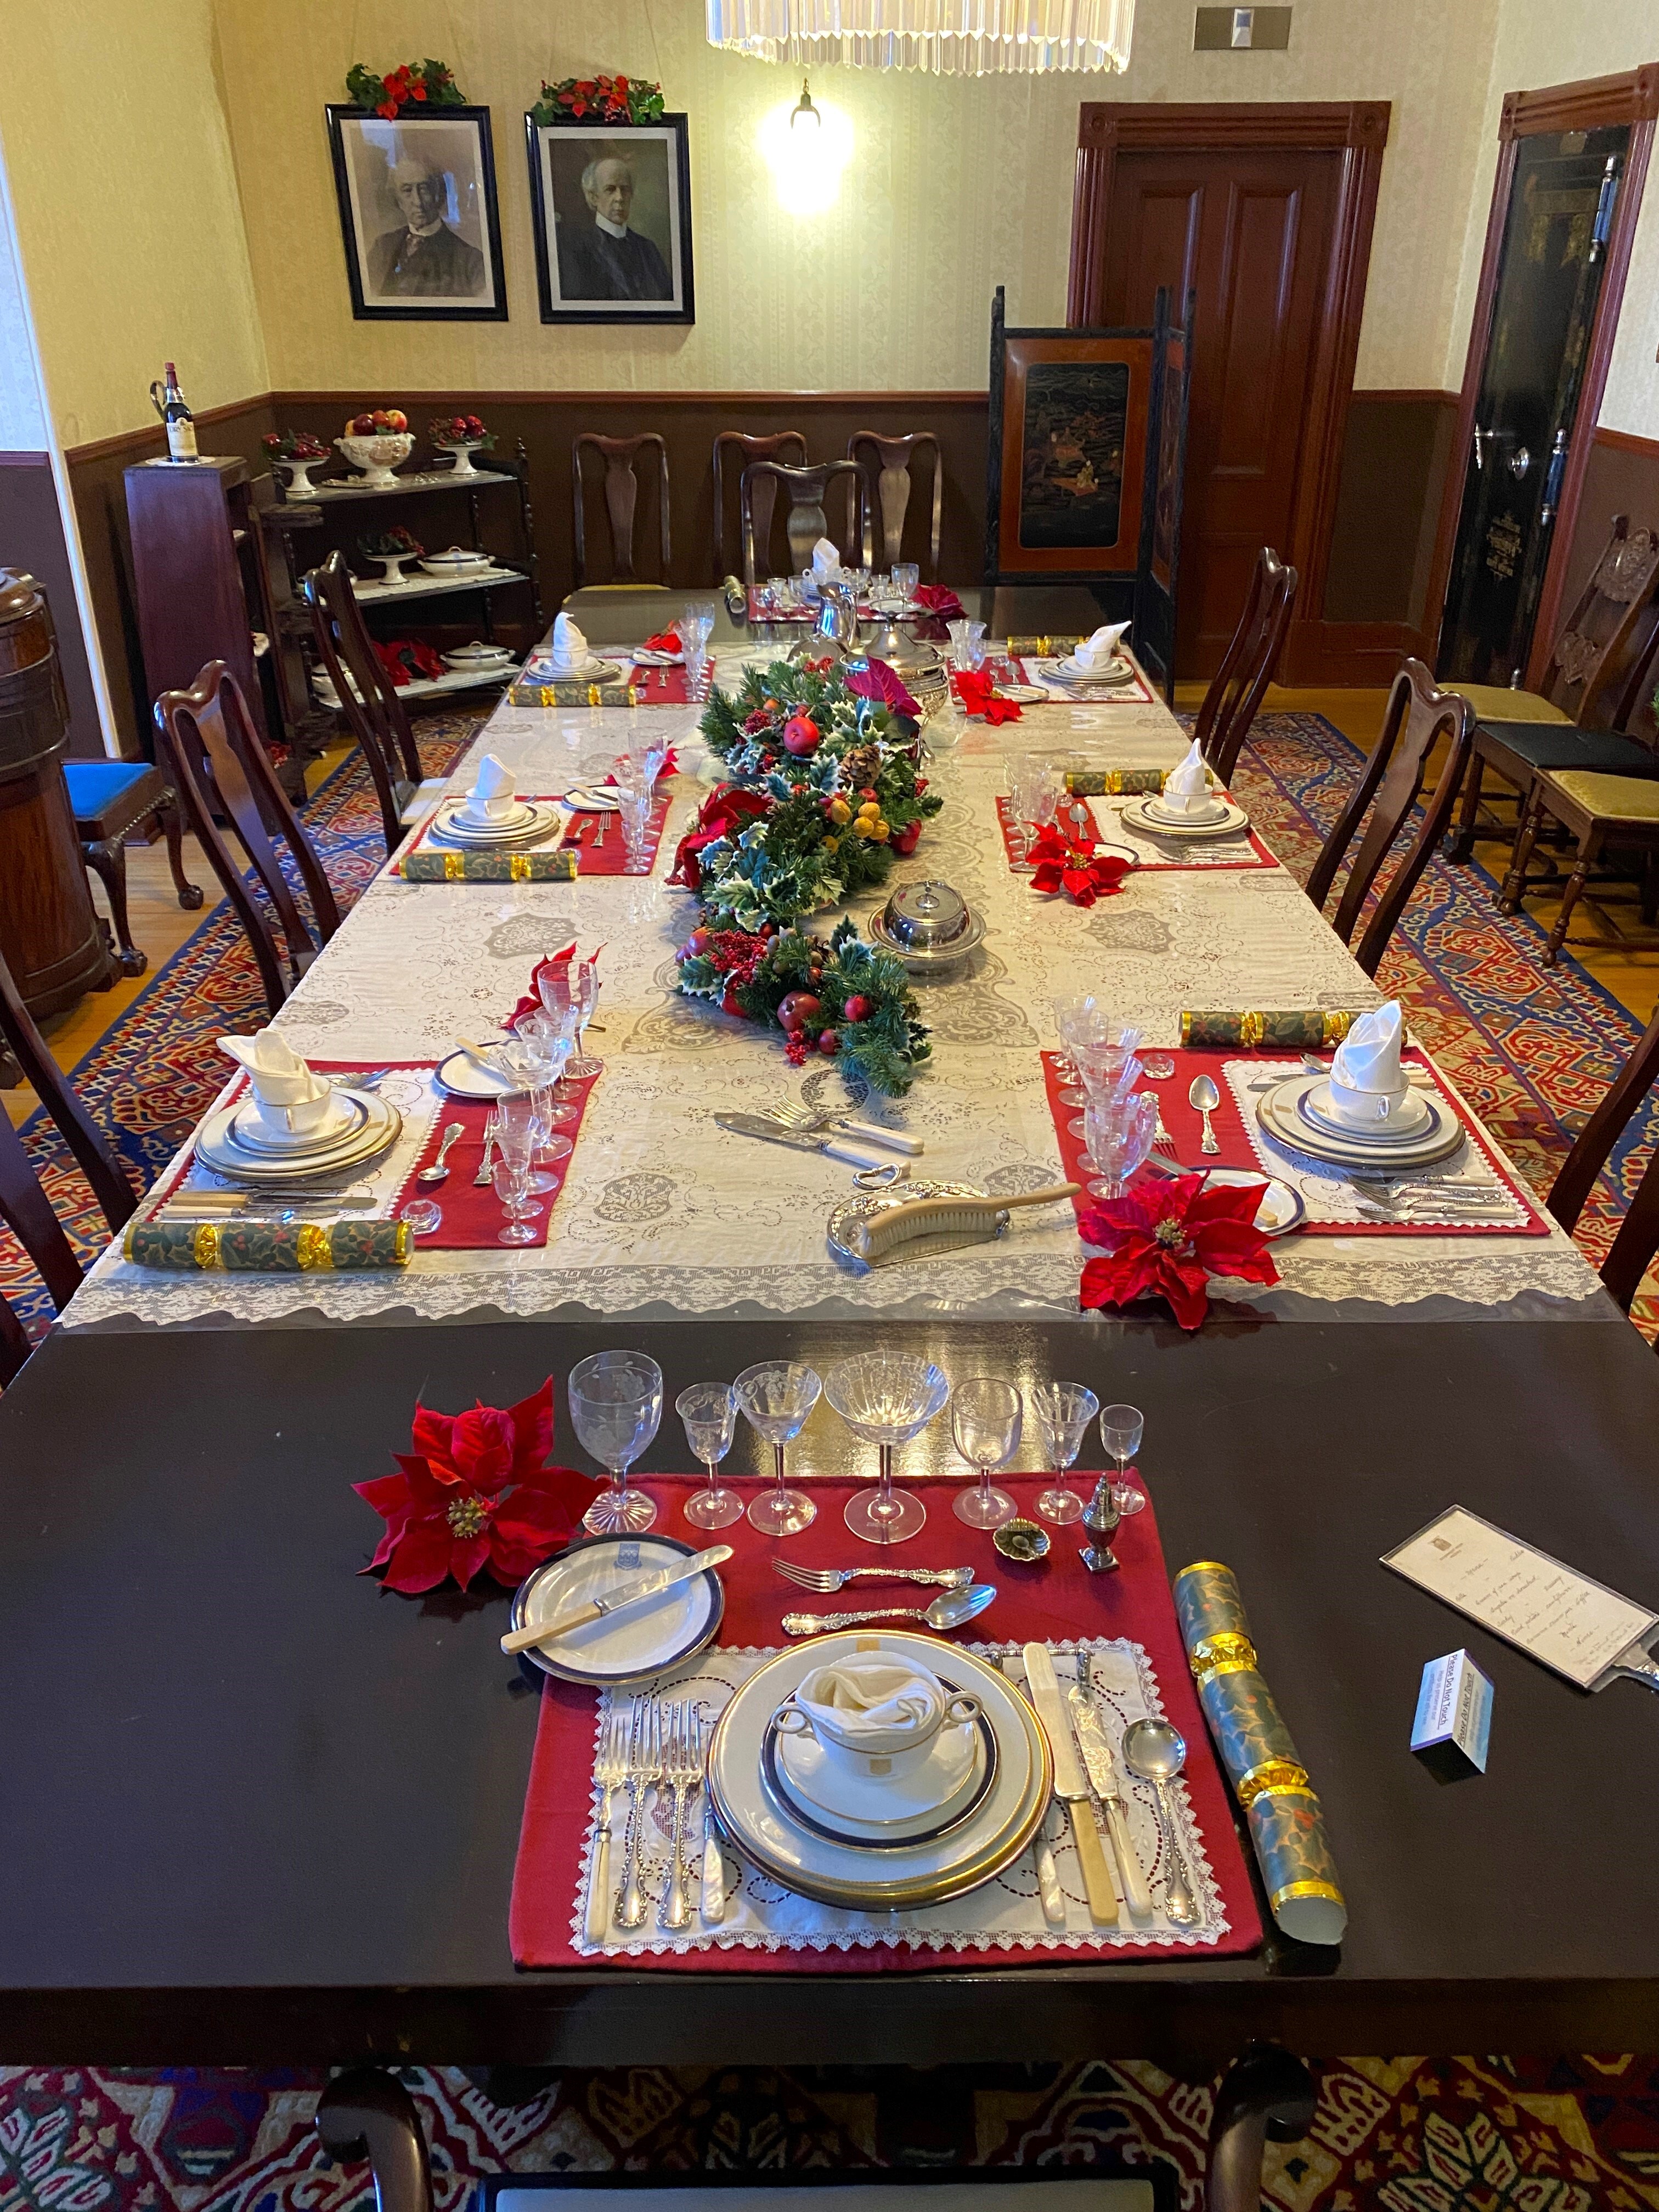 Dining room table set for a feast